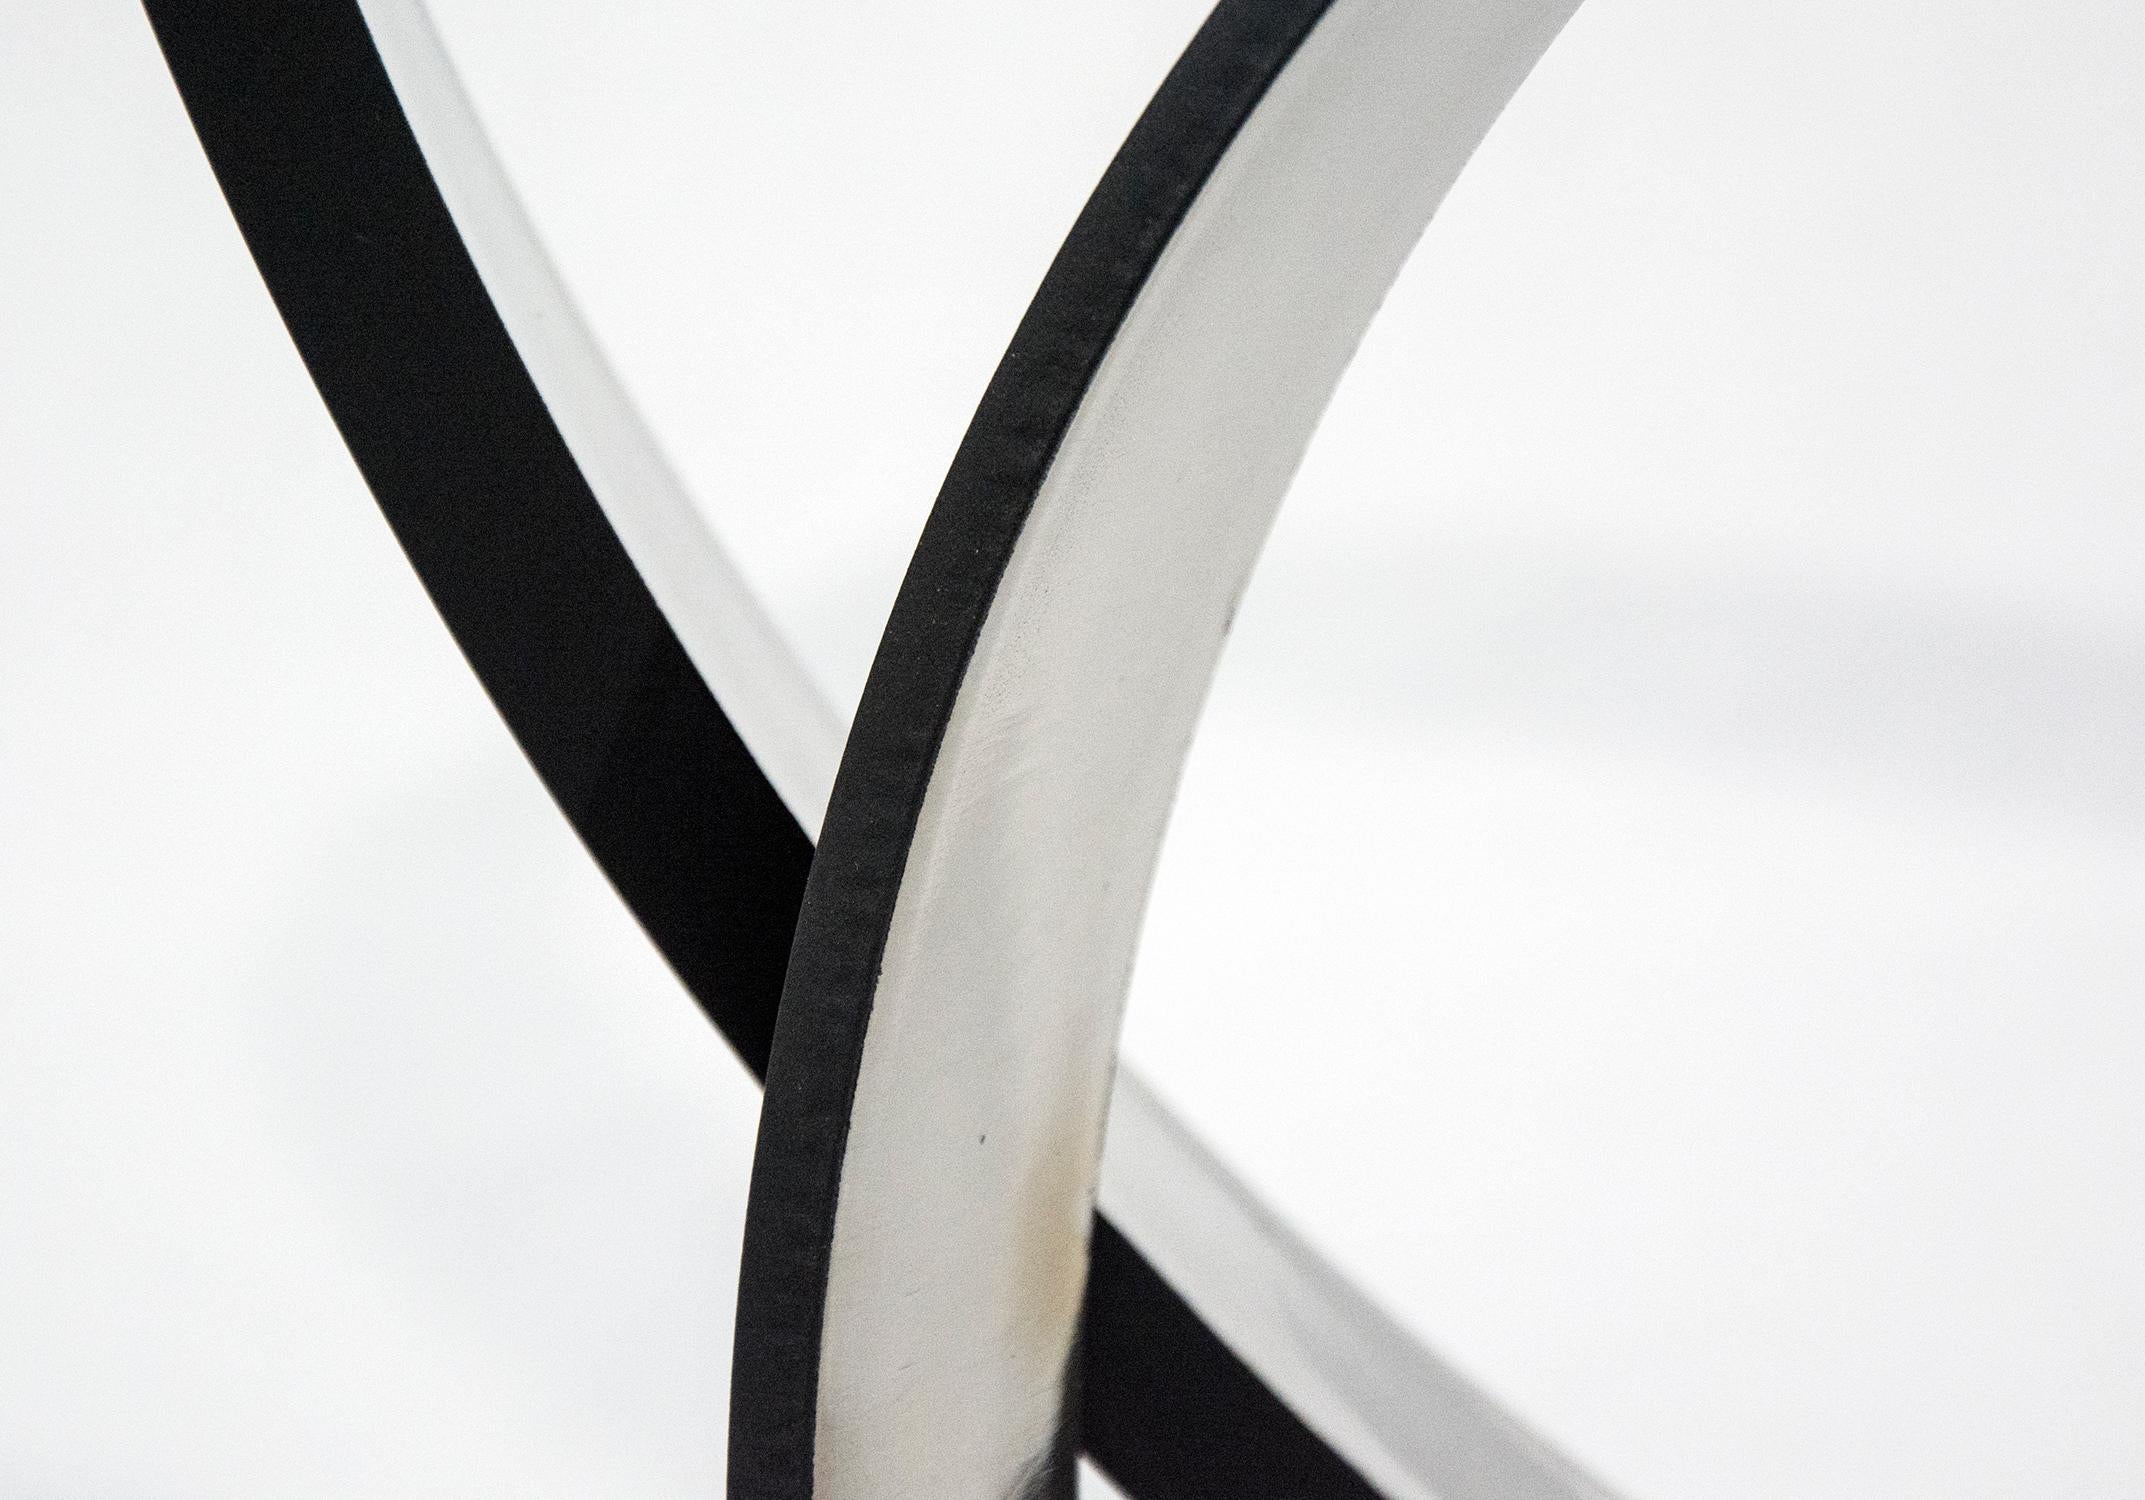 Temps Zero Black 6/10 - stainless steel, rings, table-top, abstract, sculpture - Contemporary Sculpture by Philippe Pallafray